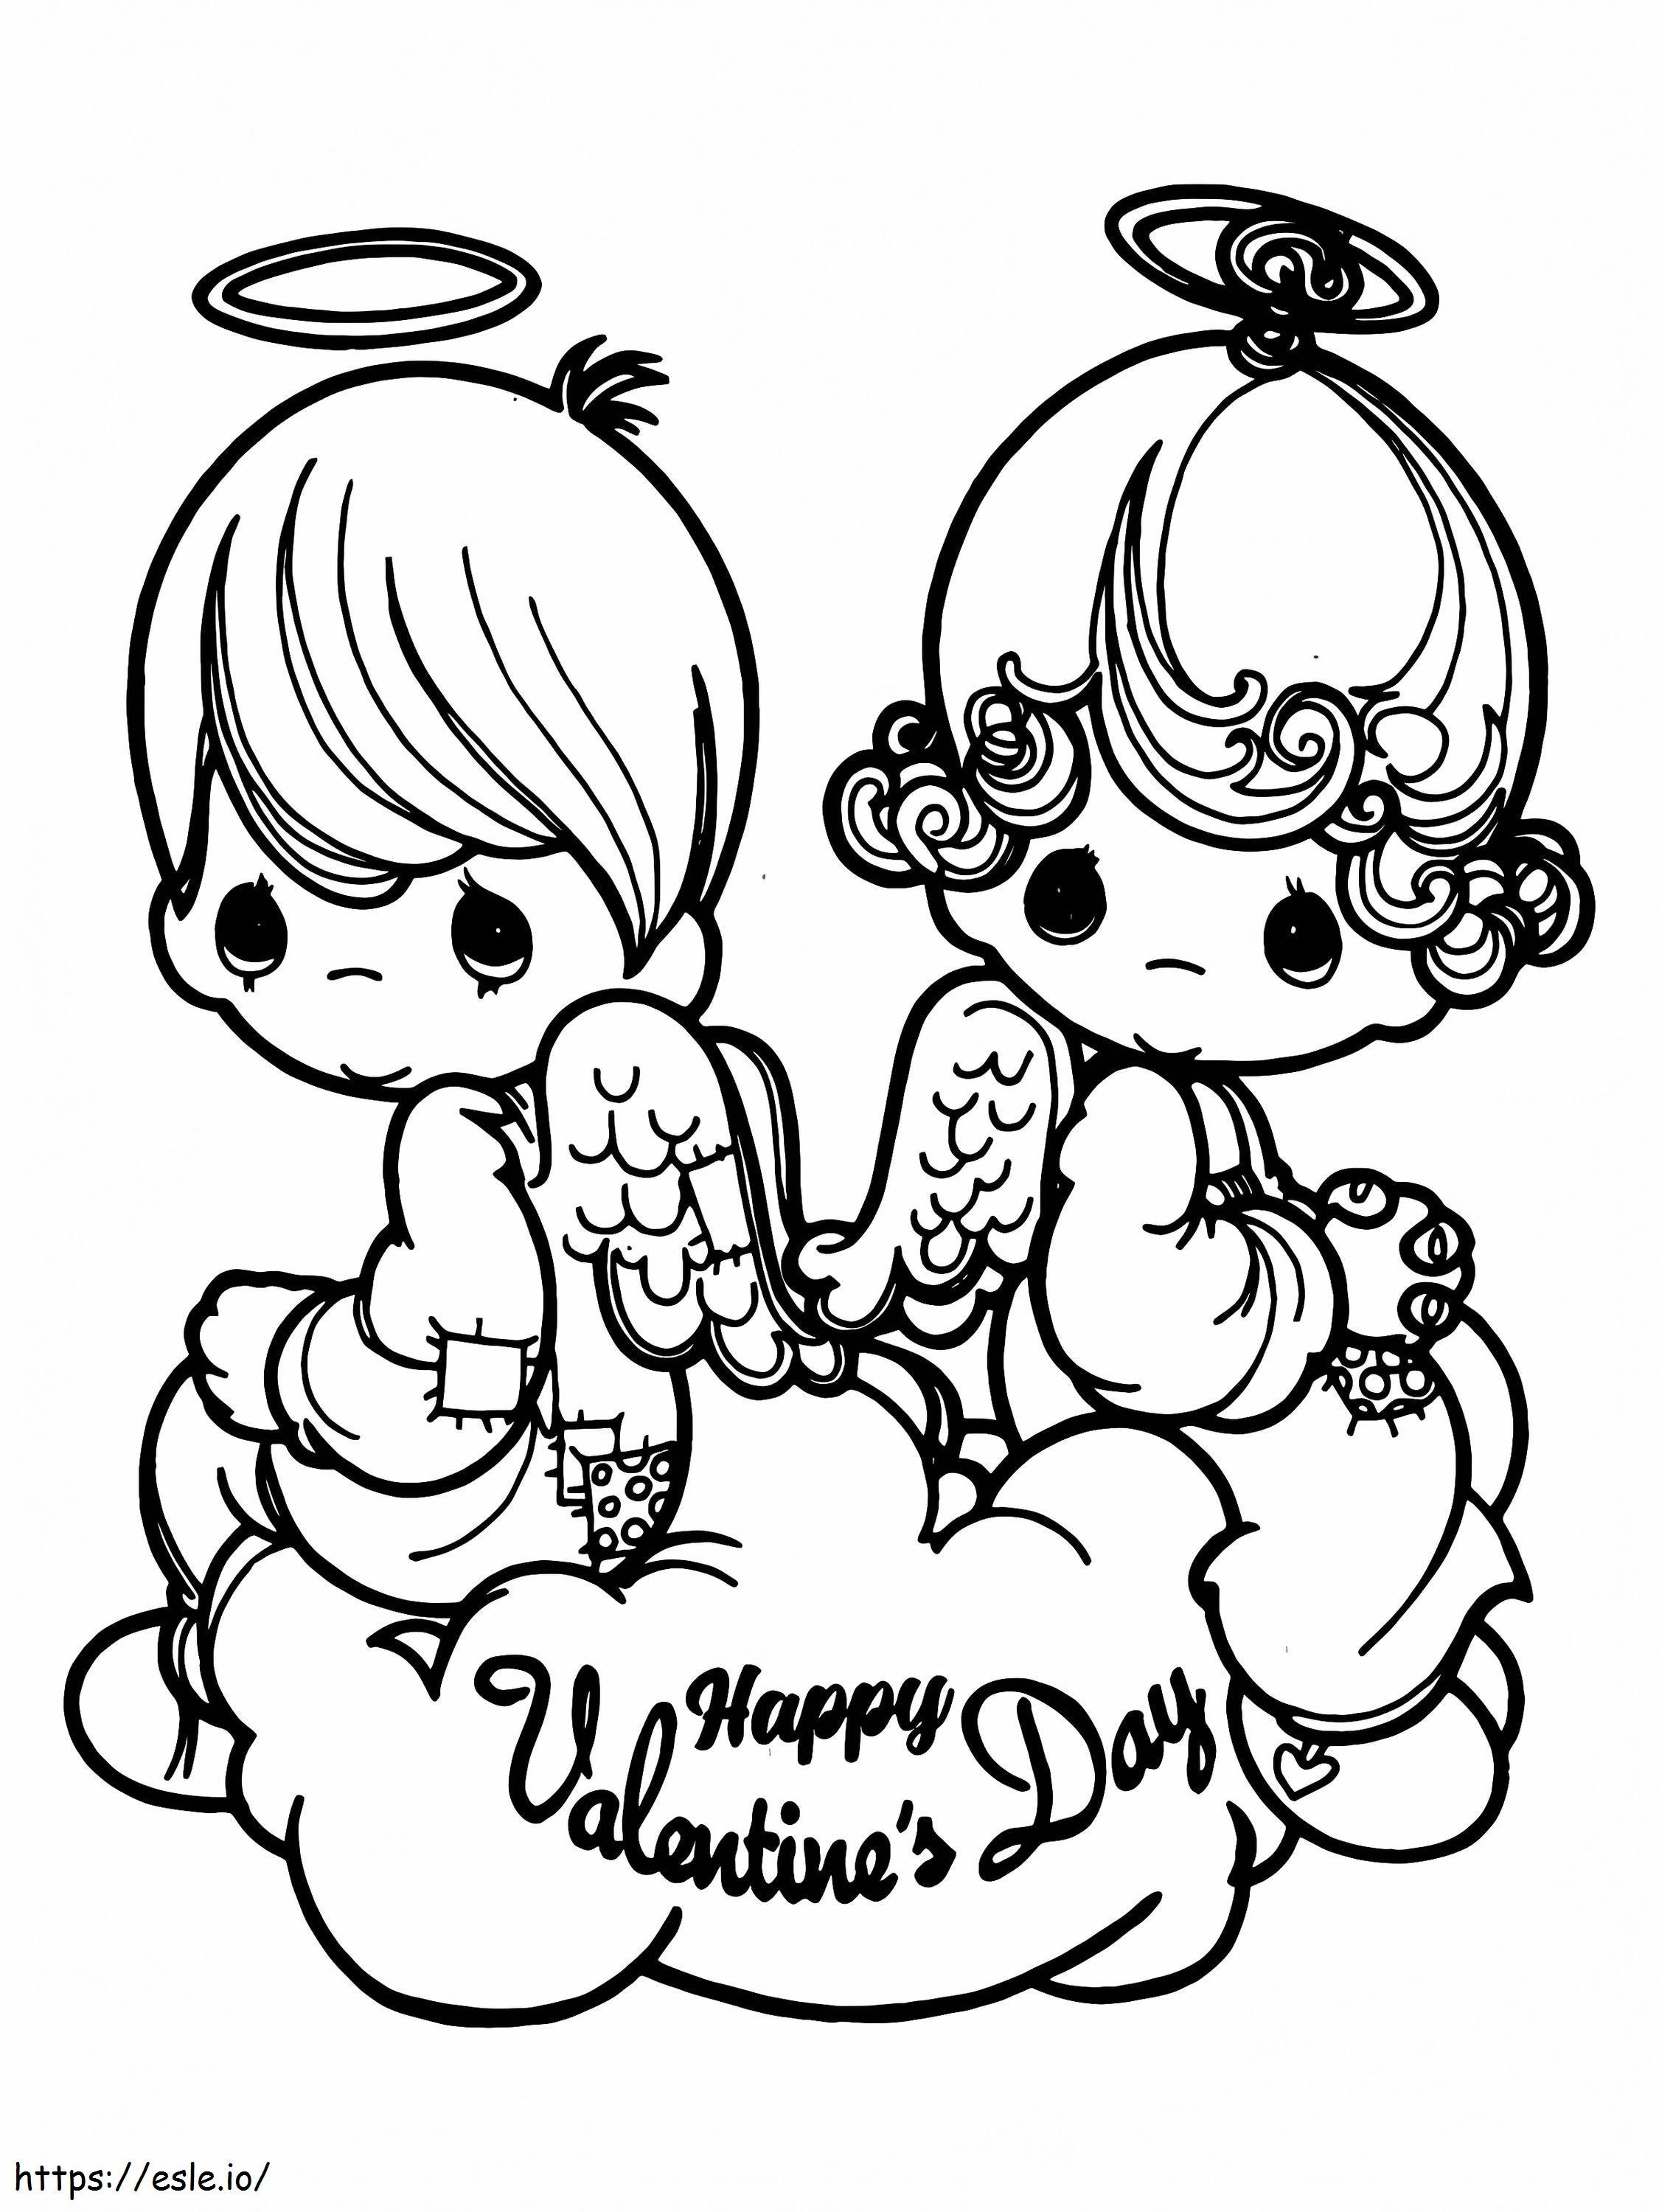 Valentine S Cupid coloring page